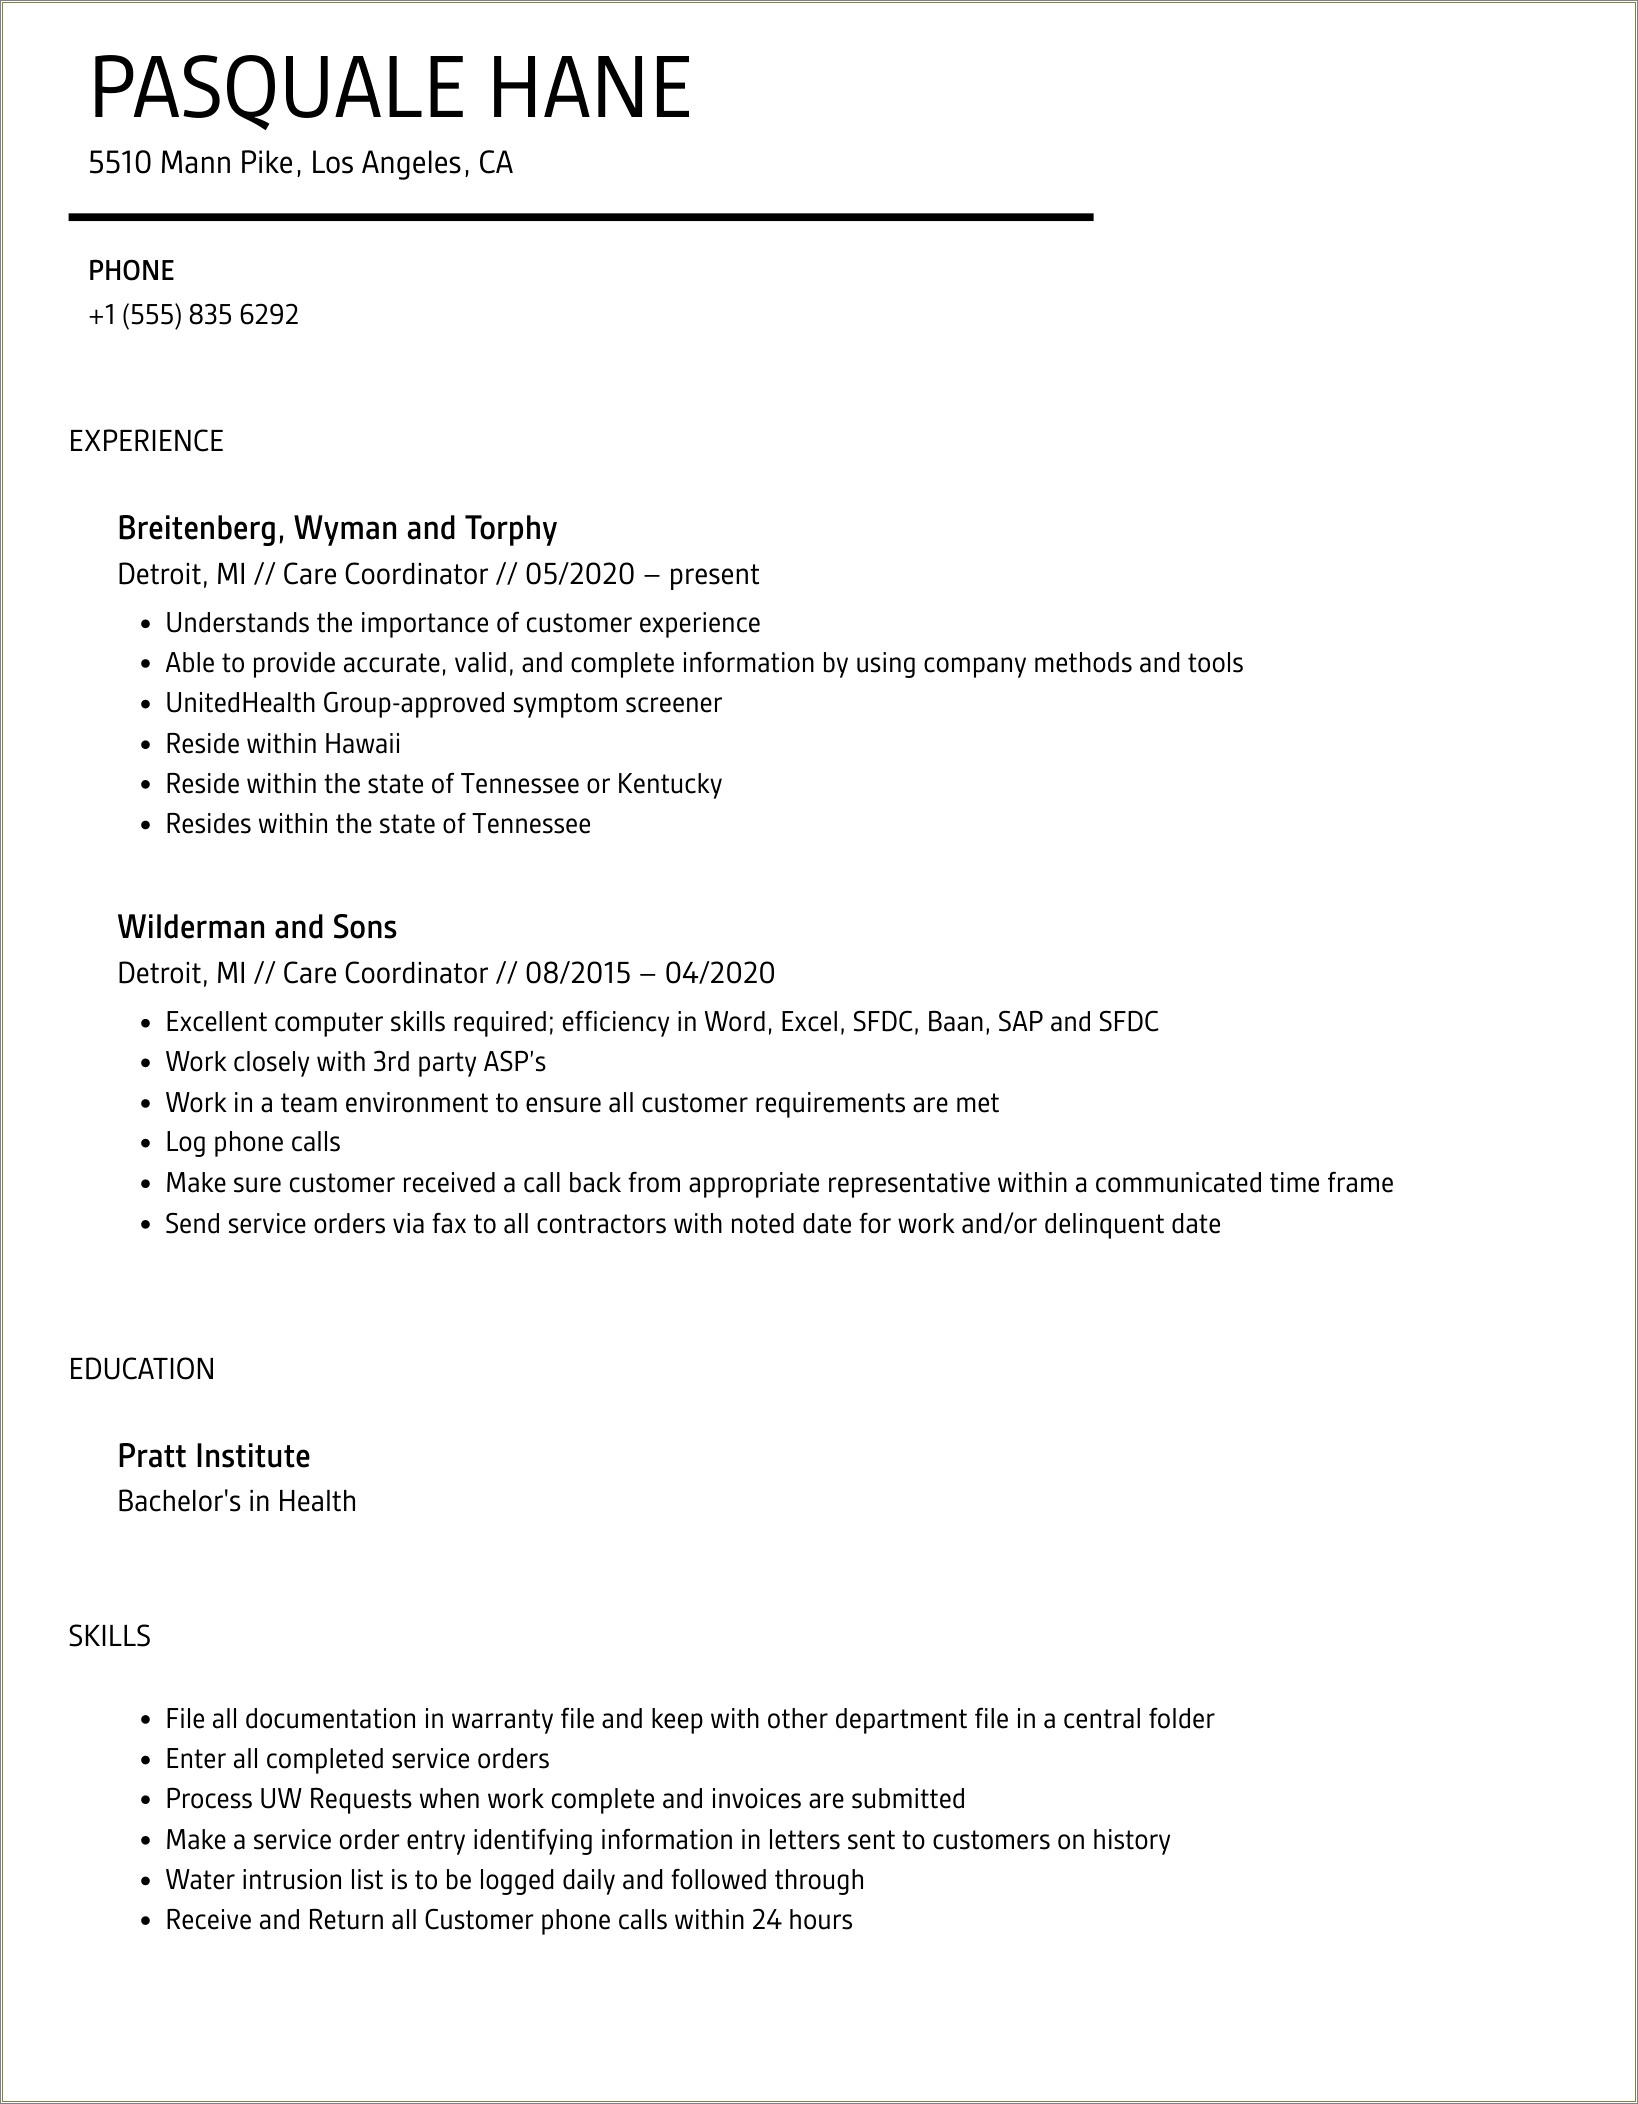 Resume Template For Mediciad Waiver Care Coordinator